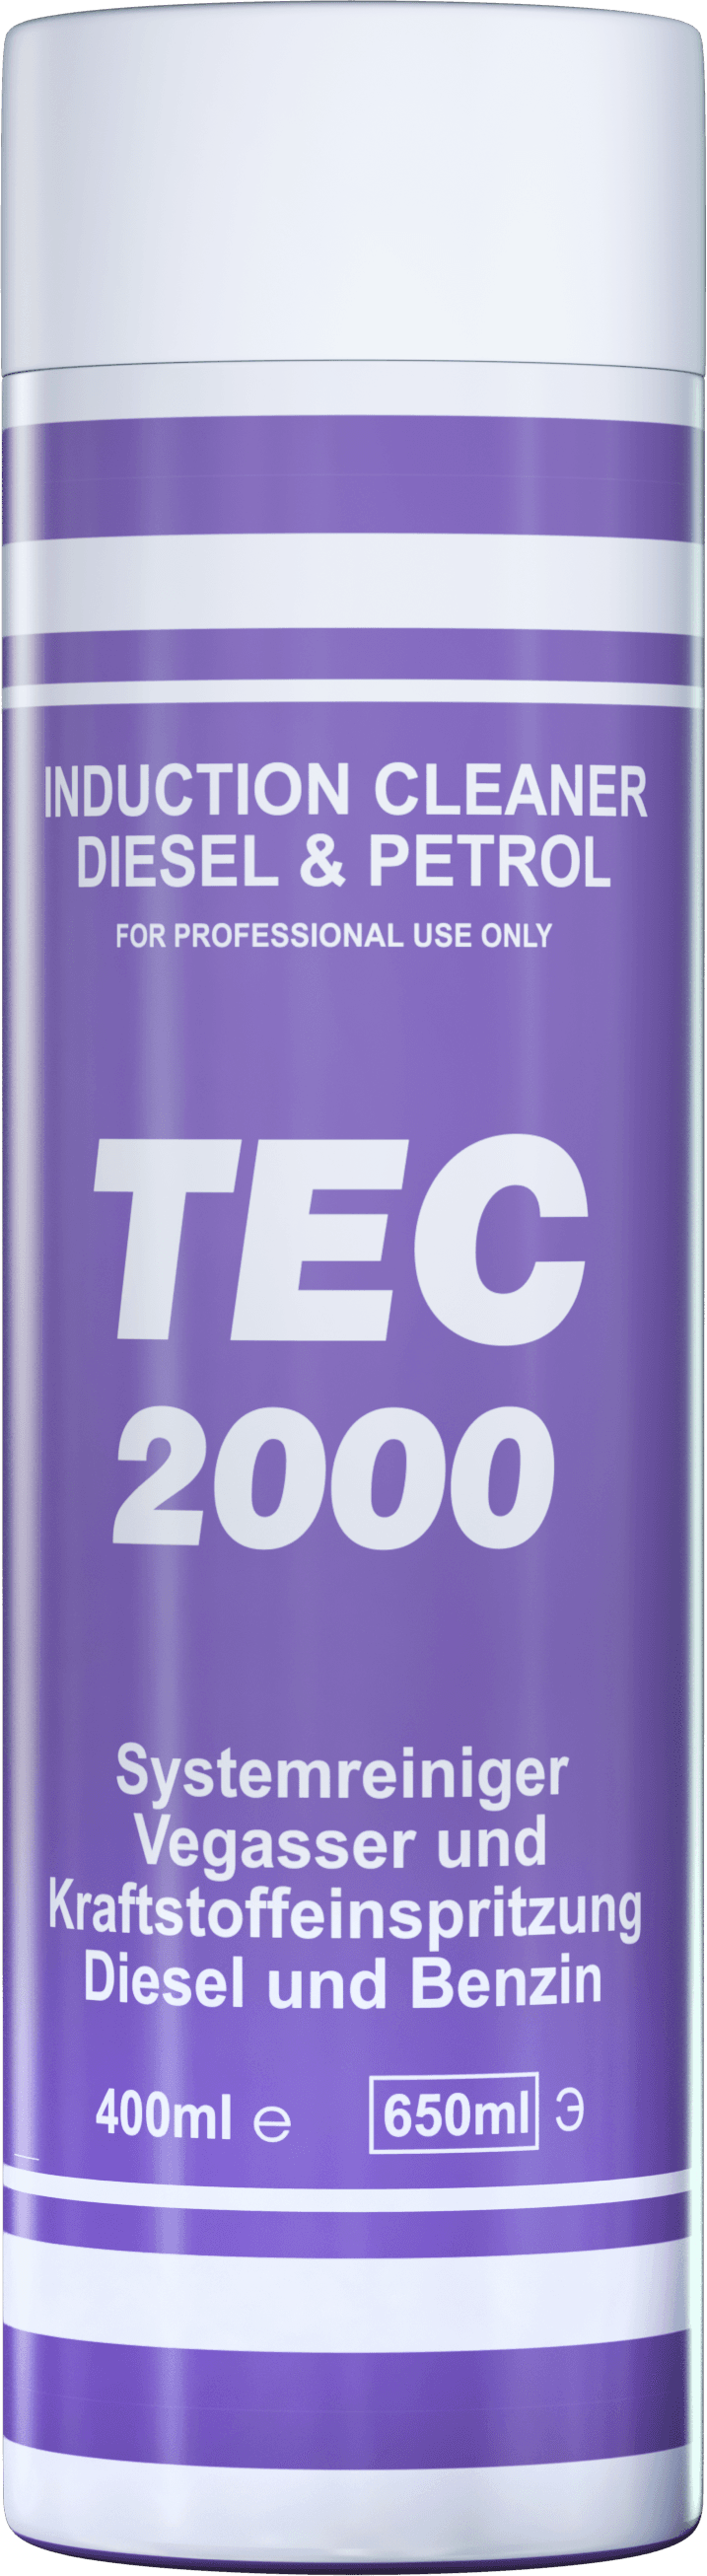 TEC 2000 Induction Cleaner product